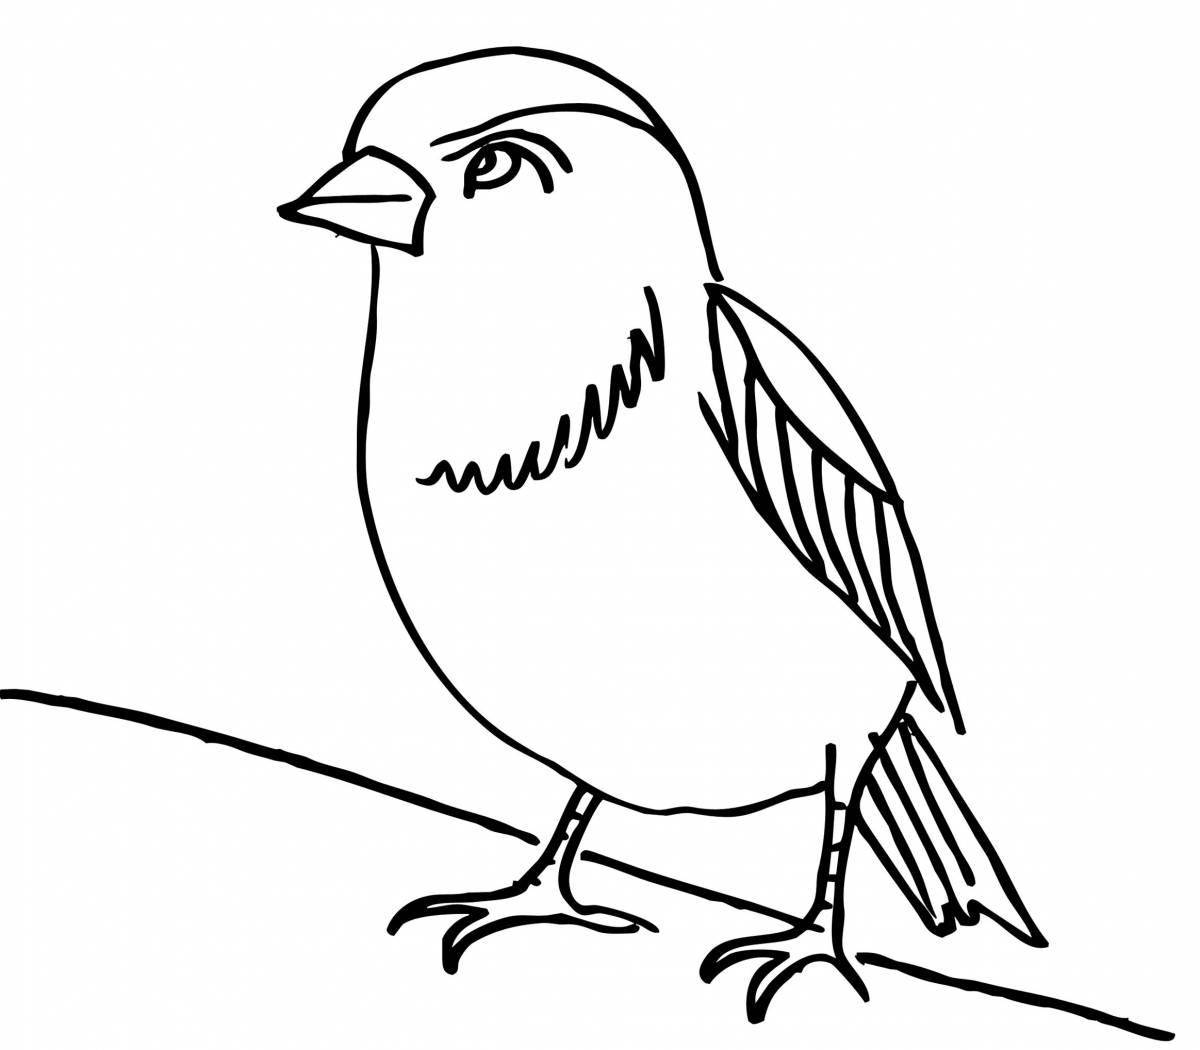 Sparrow coloring book for kids 2-3 years old